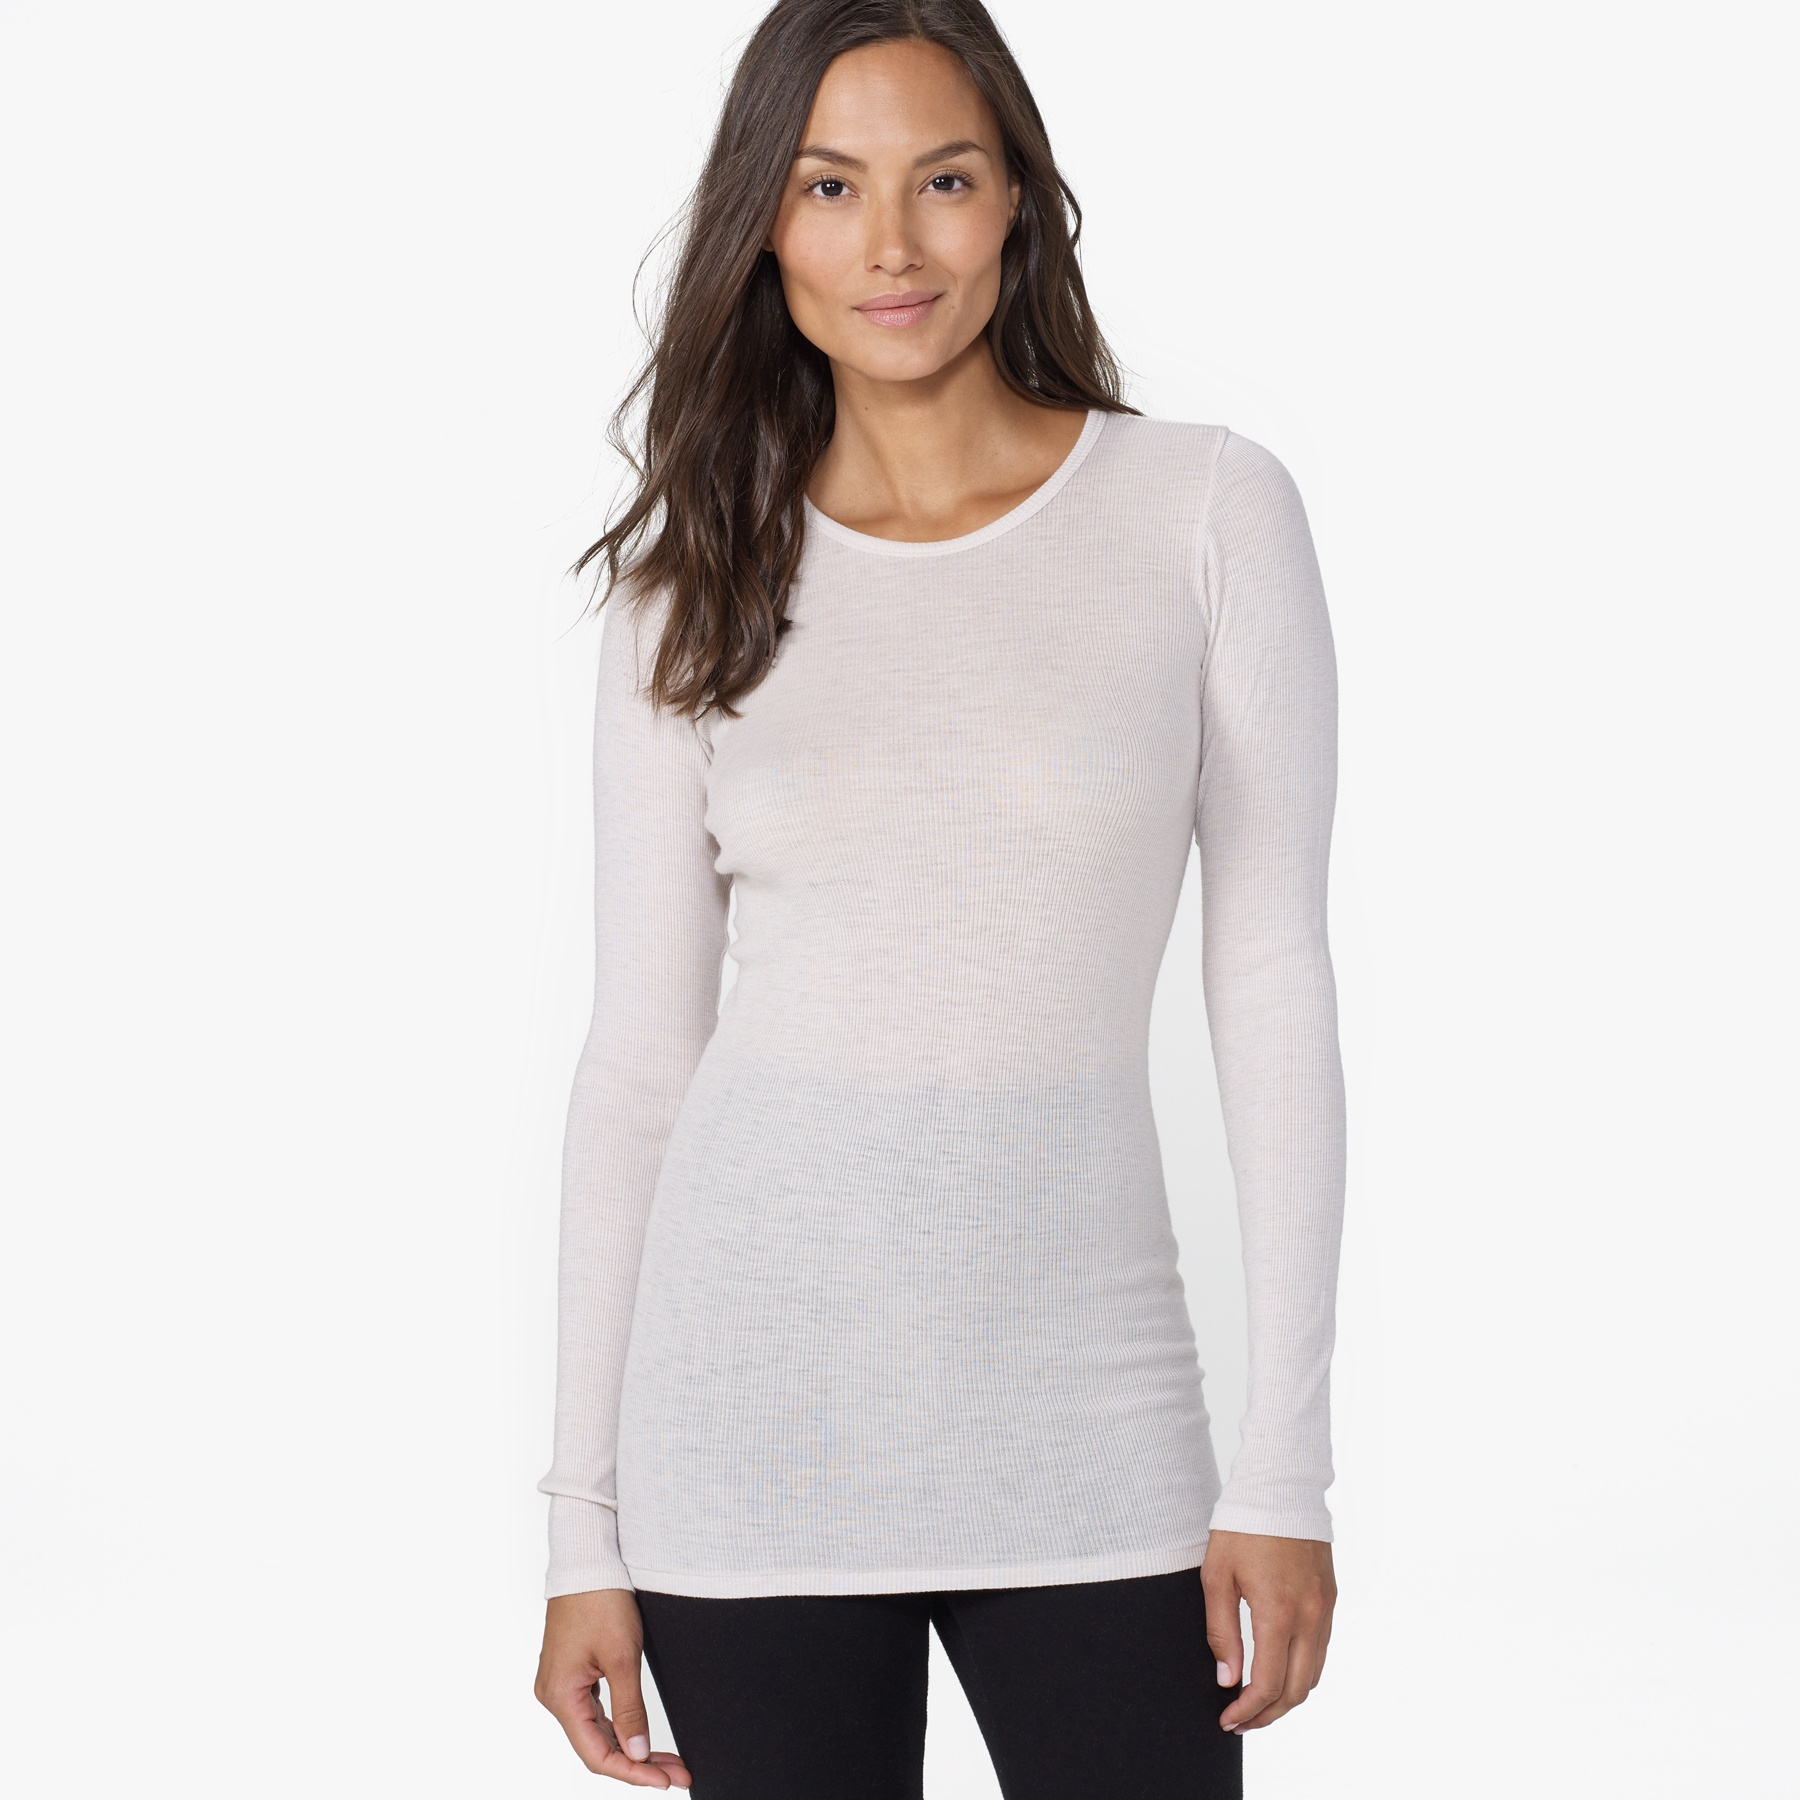 James Perse Ribbed Cashmere Long Sleeve Tee in White - Lyst